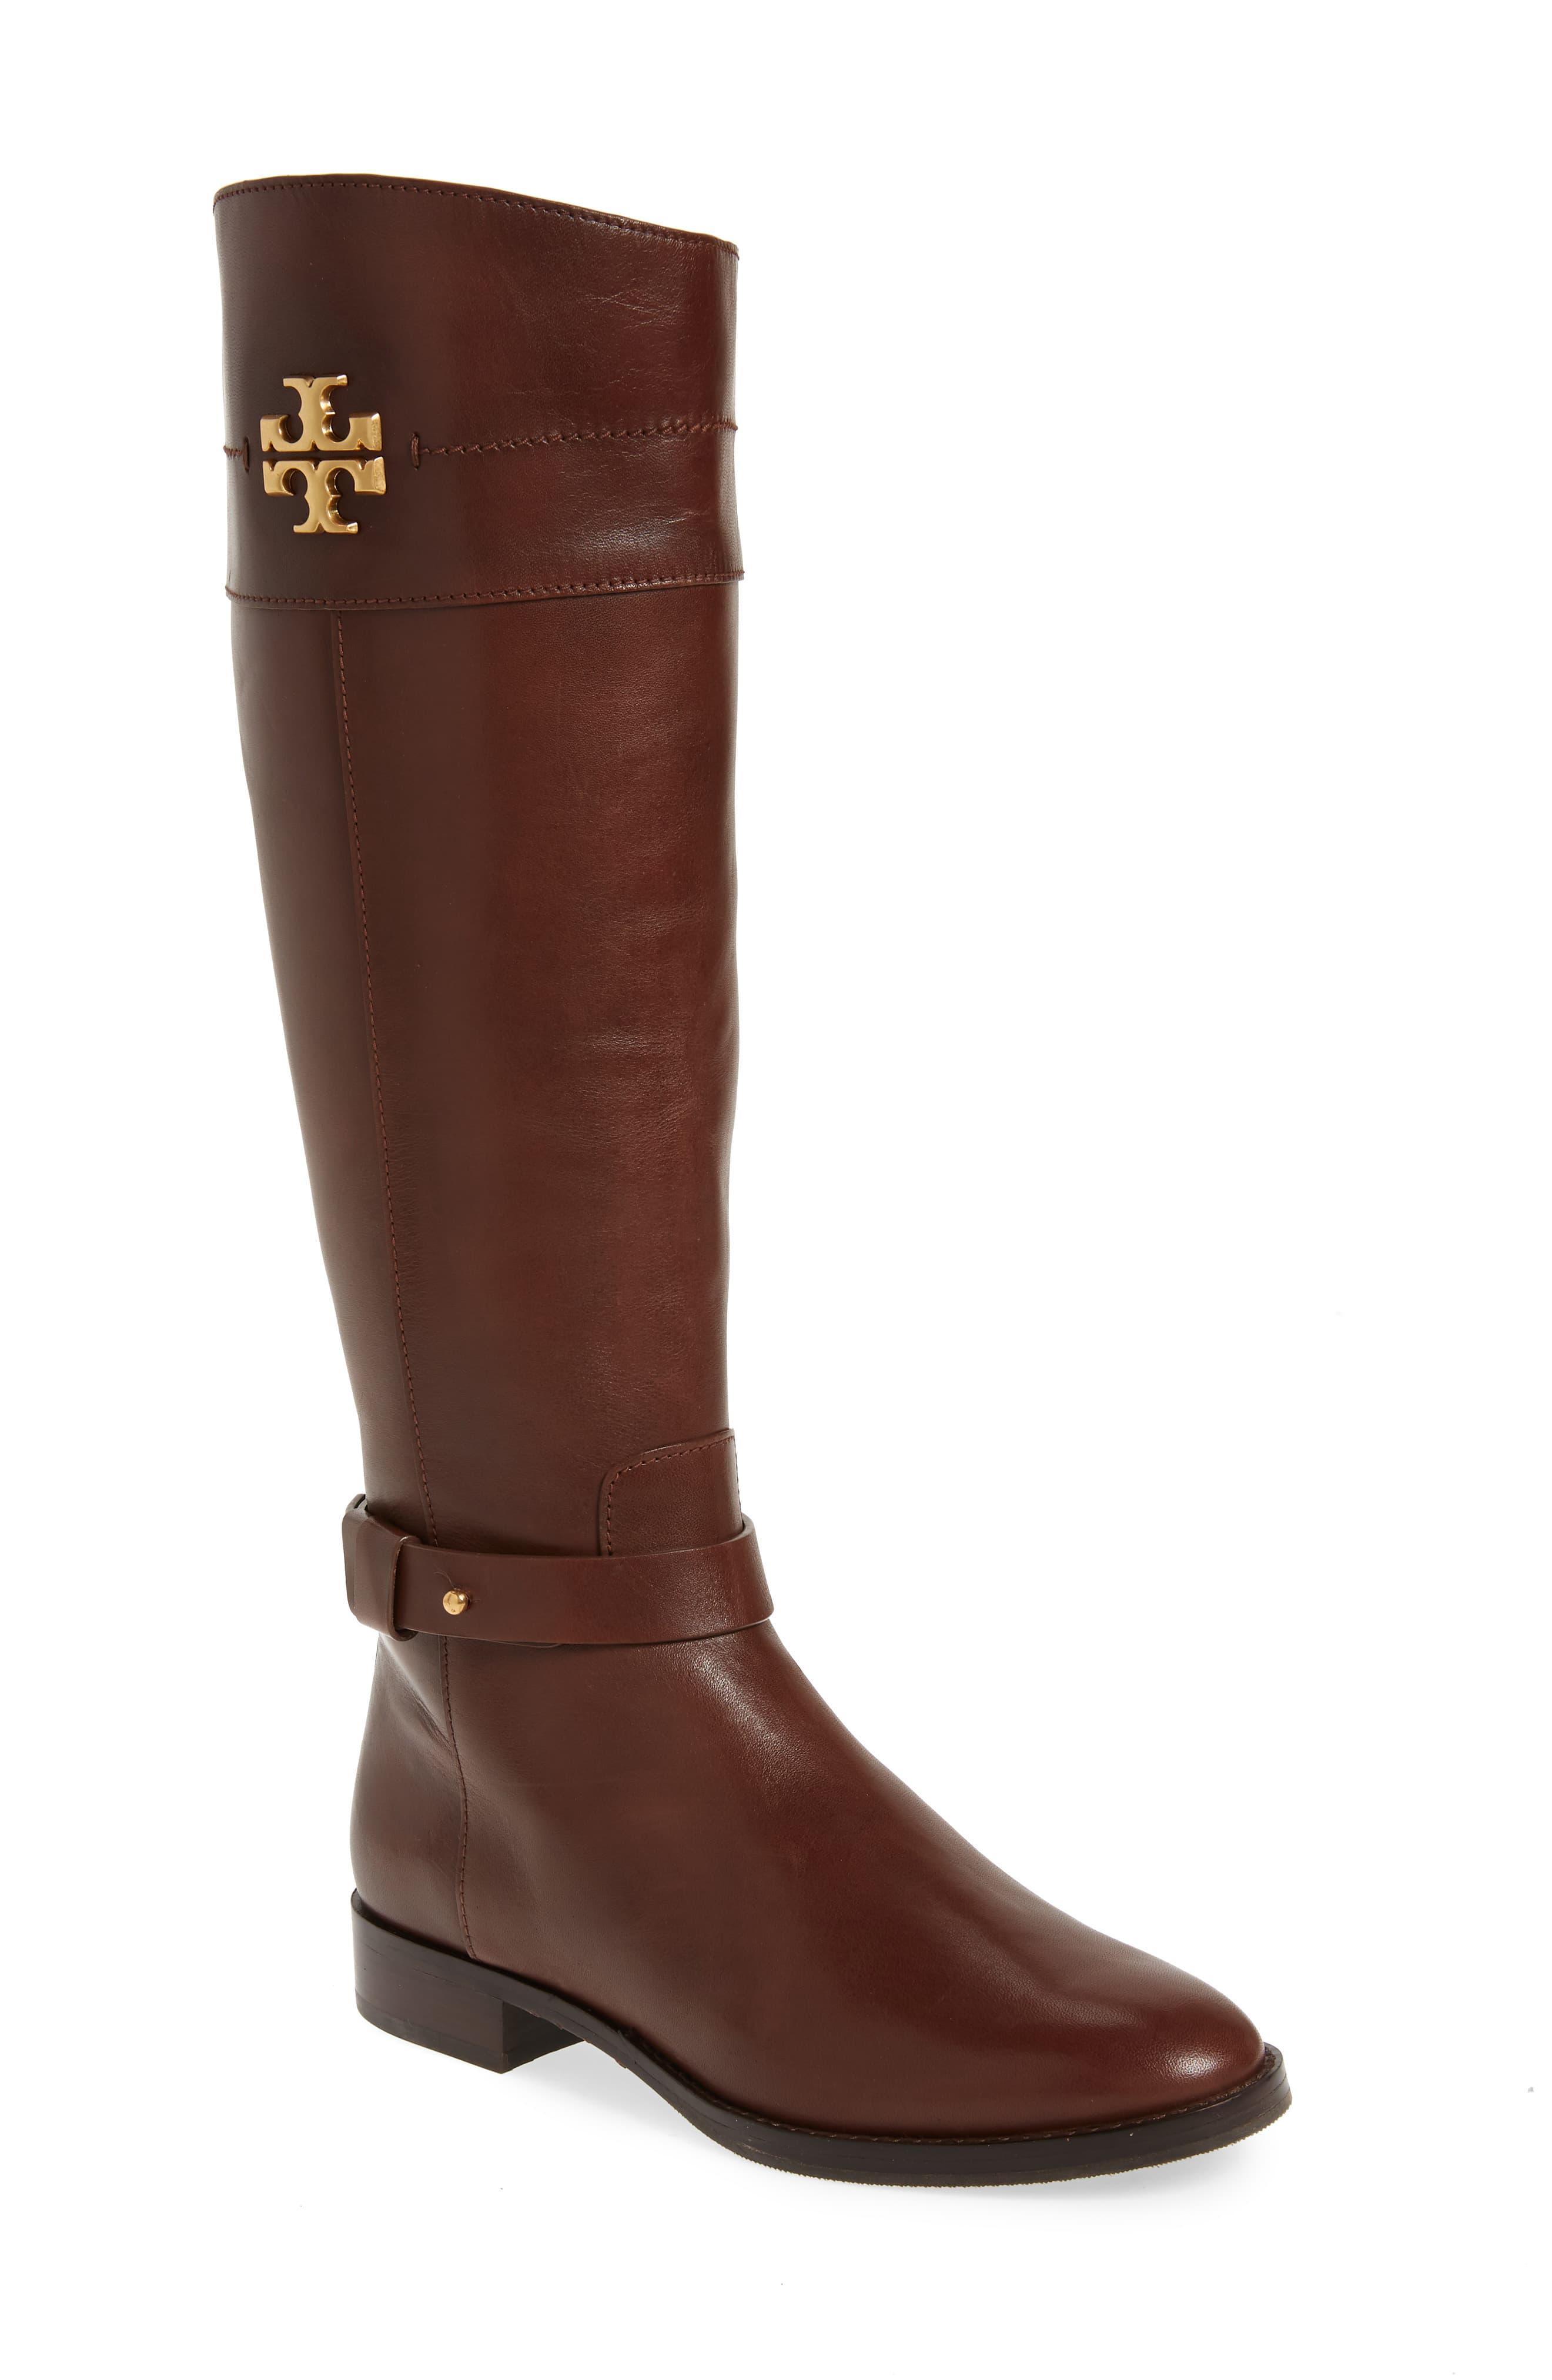 Tory Burch Everly Riding Boot in Brown - Lyst